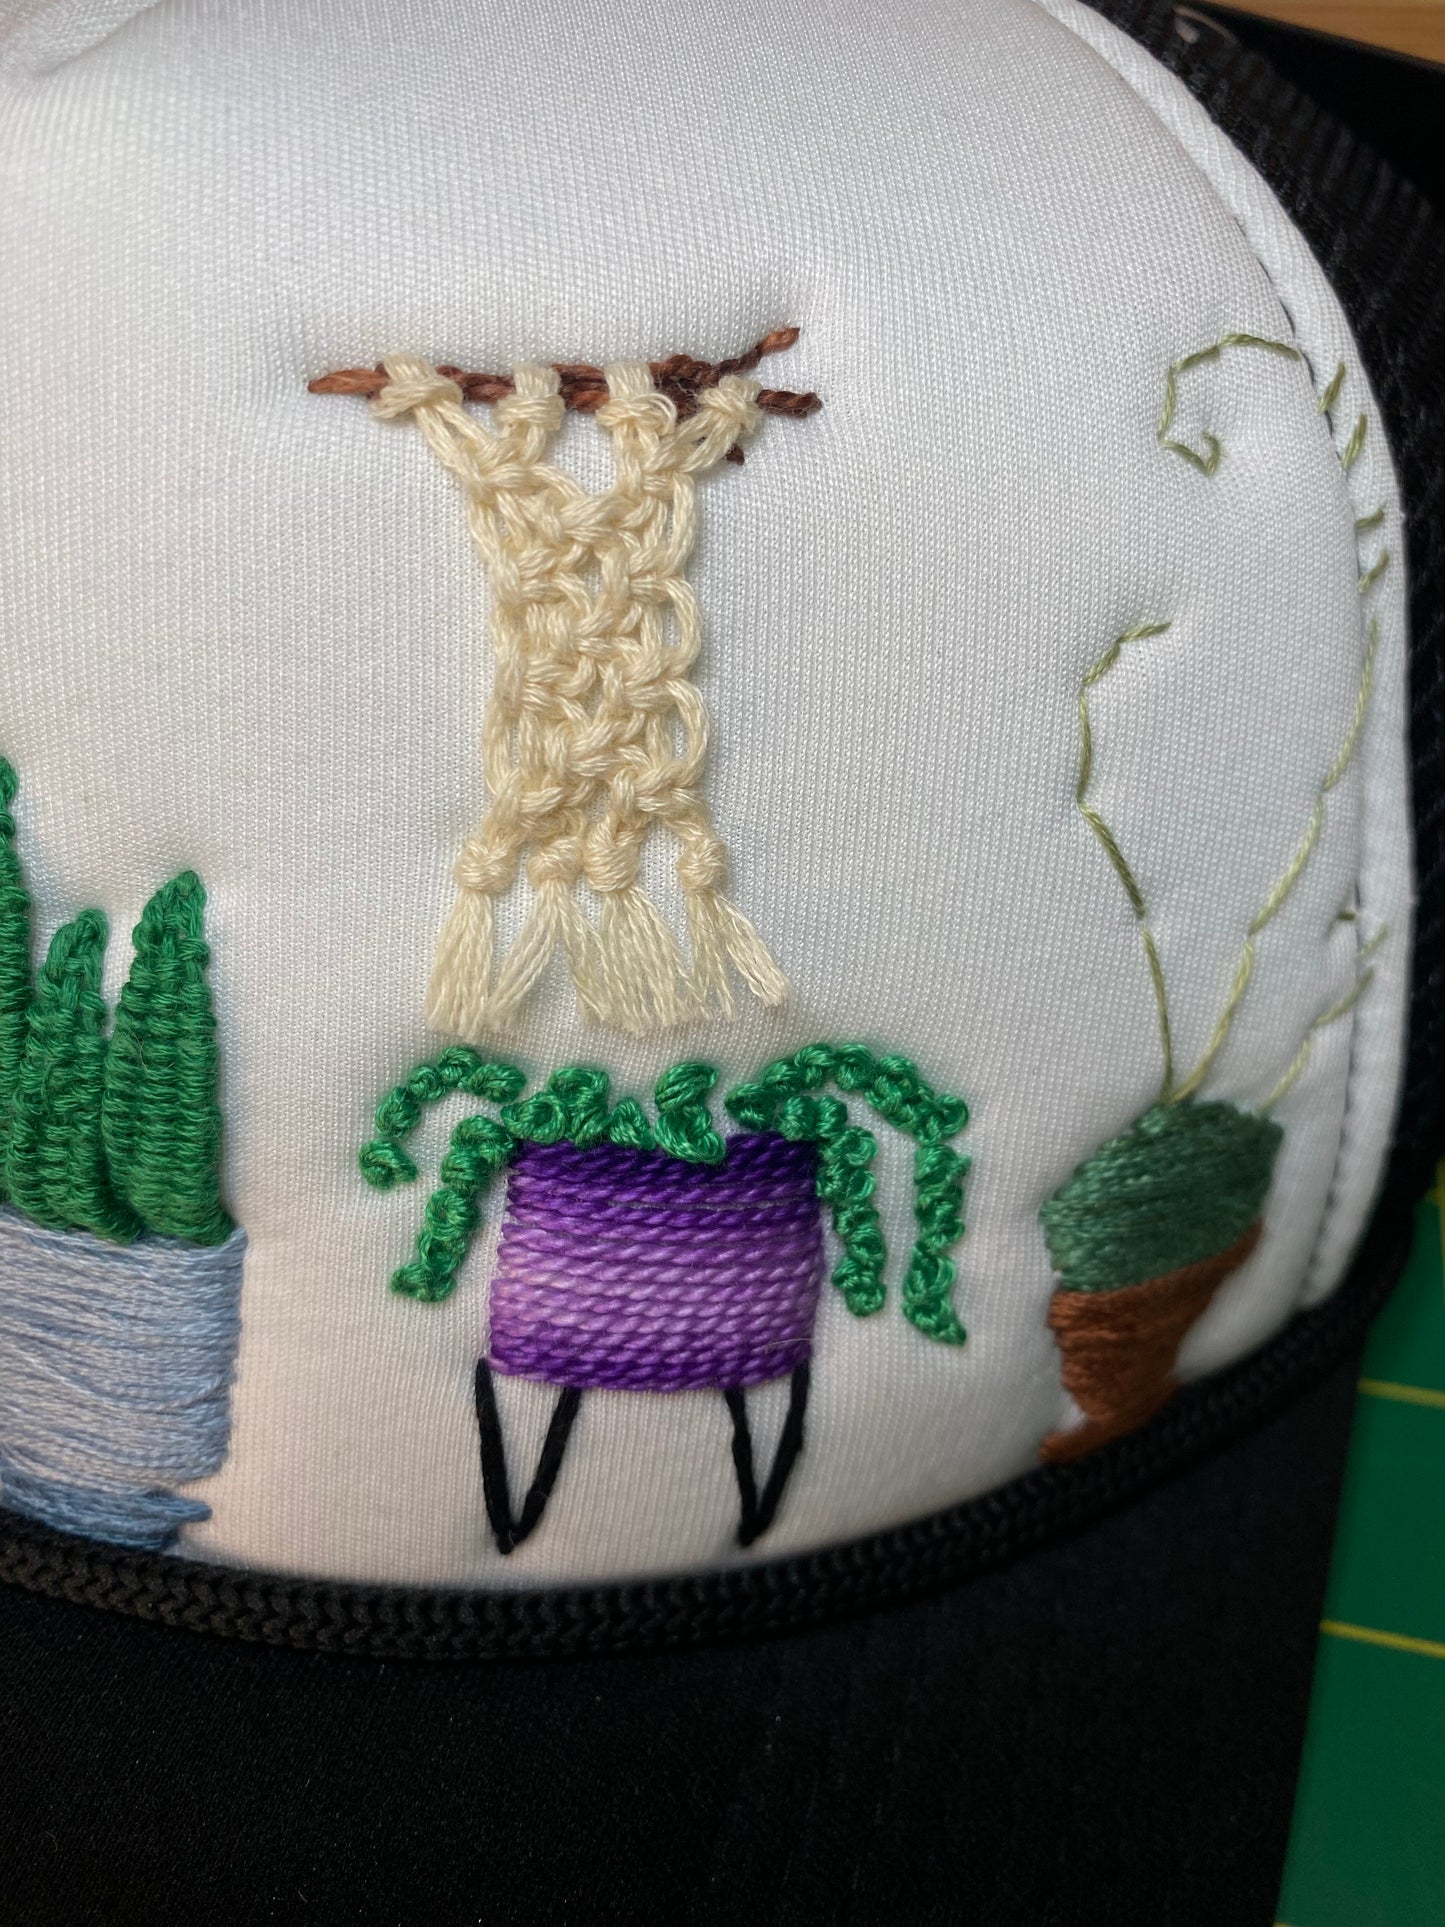 Houseplant Lovers Trucker Hat, hand embroidered